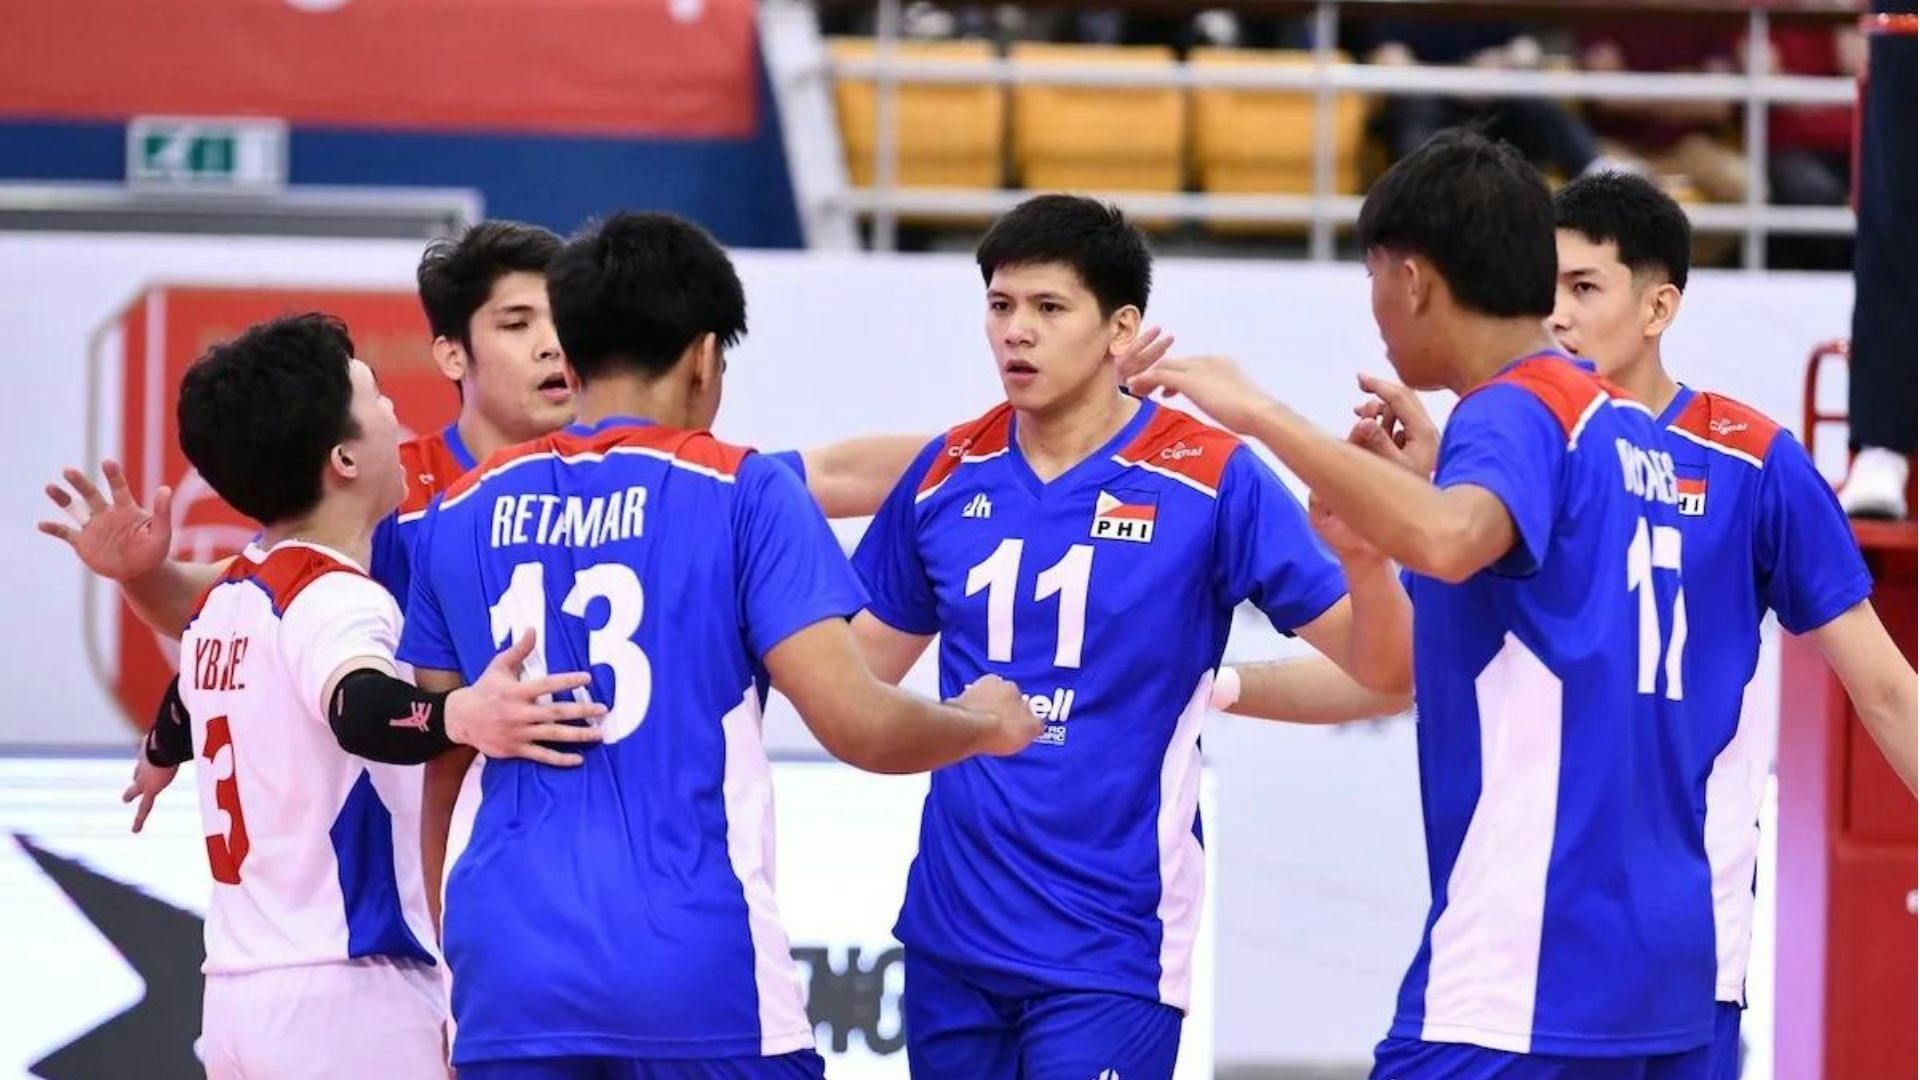 Alas Pilipinas finish tenth in AVC Challenge Cup for Men after bowing to Thailand